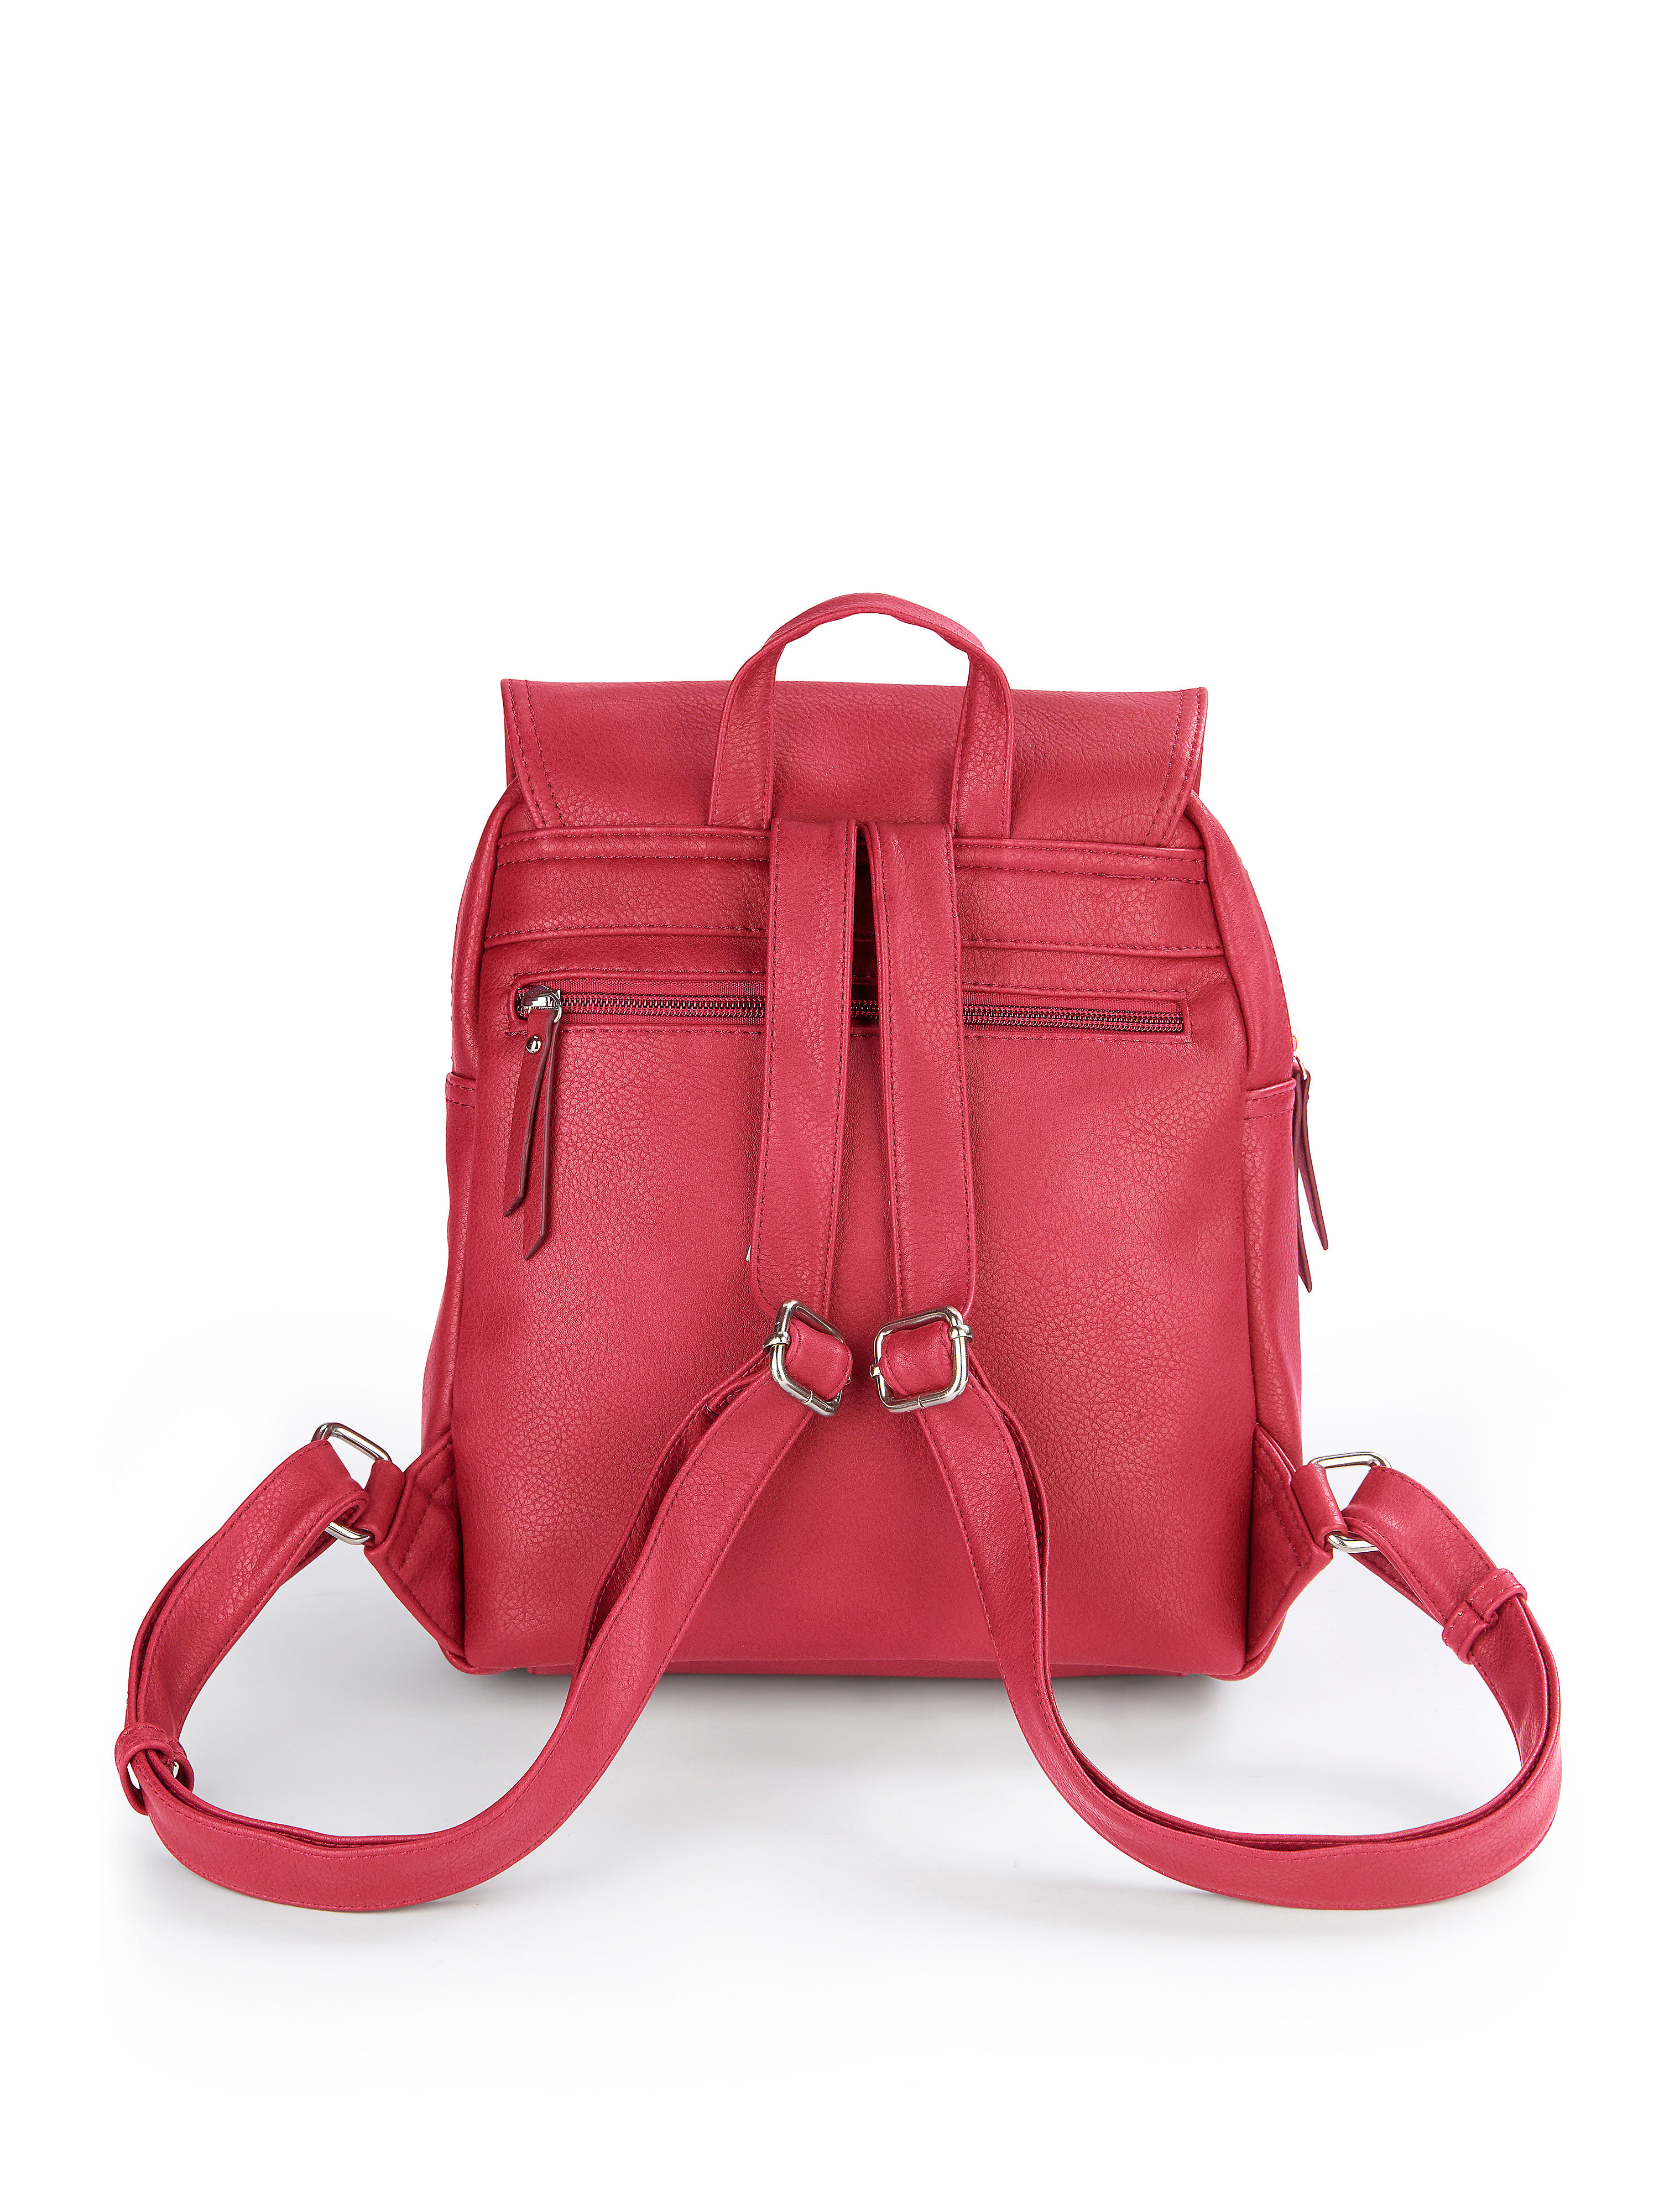 Gabor Bags - Backpack Mina - cherry red